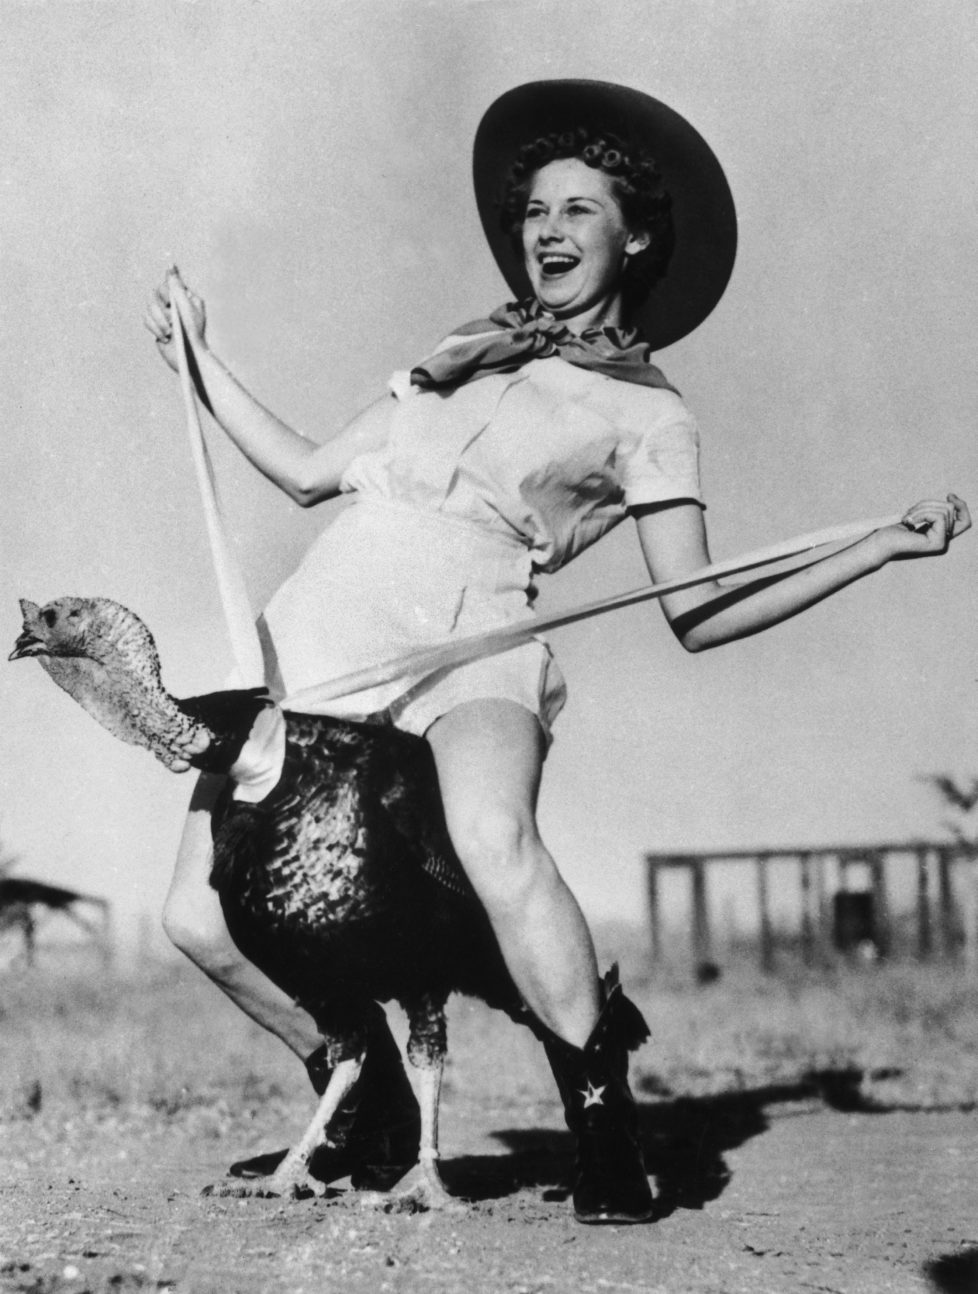 UNSPECIFIED - OCTOBER 29: Dottie Richardson Riding A Turkey For Thanksgiving In 1938. (Photo by Keystone-France/Gamma-Keystone via Getty Images)